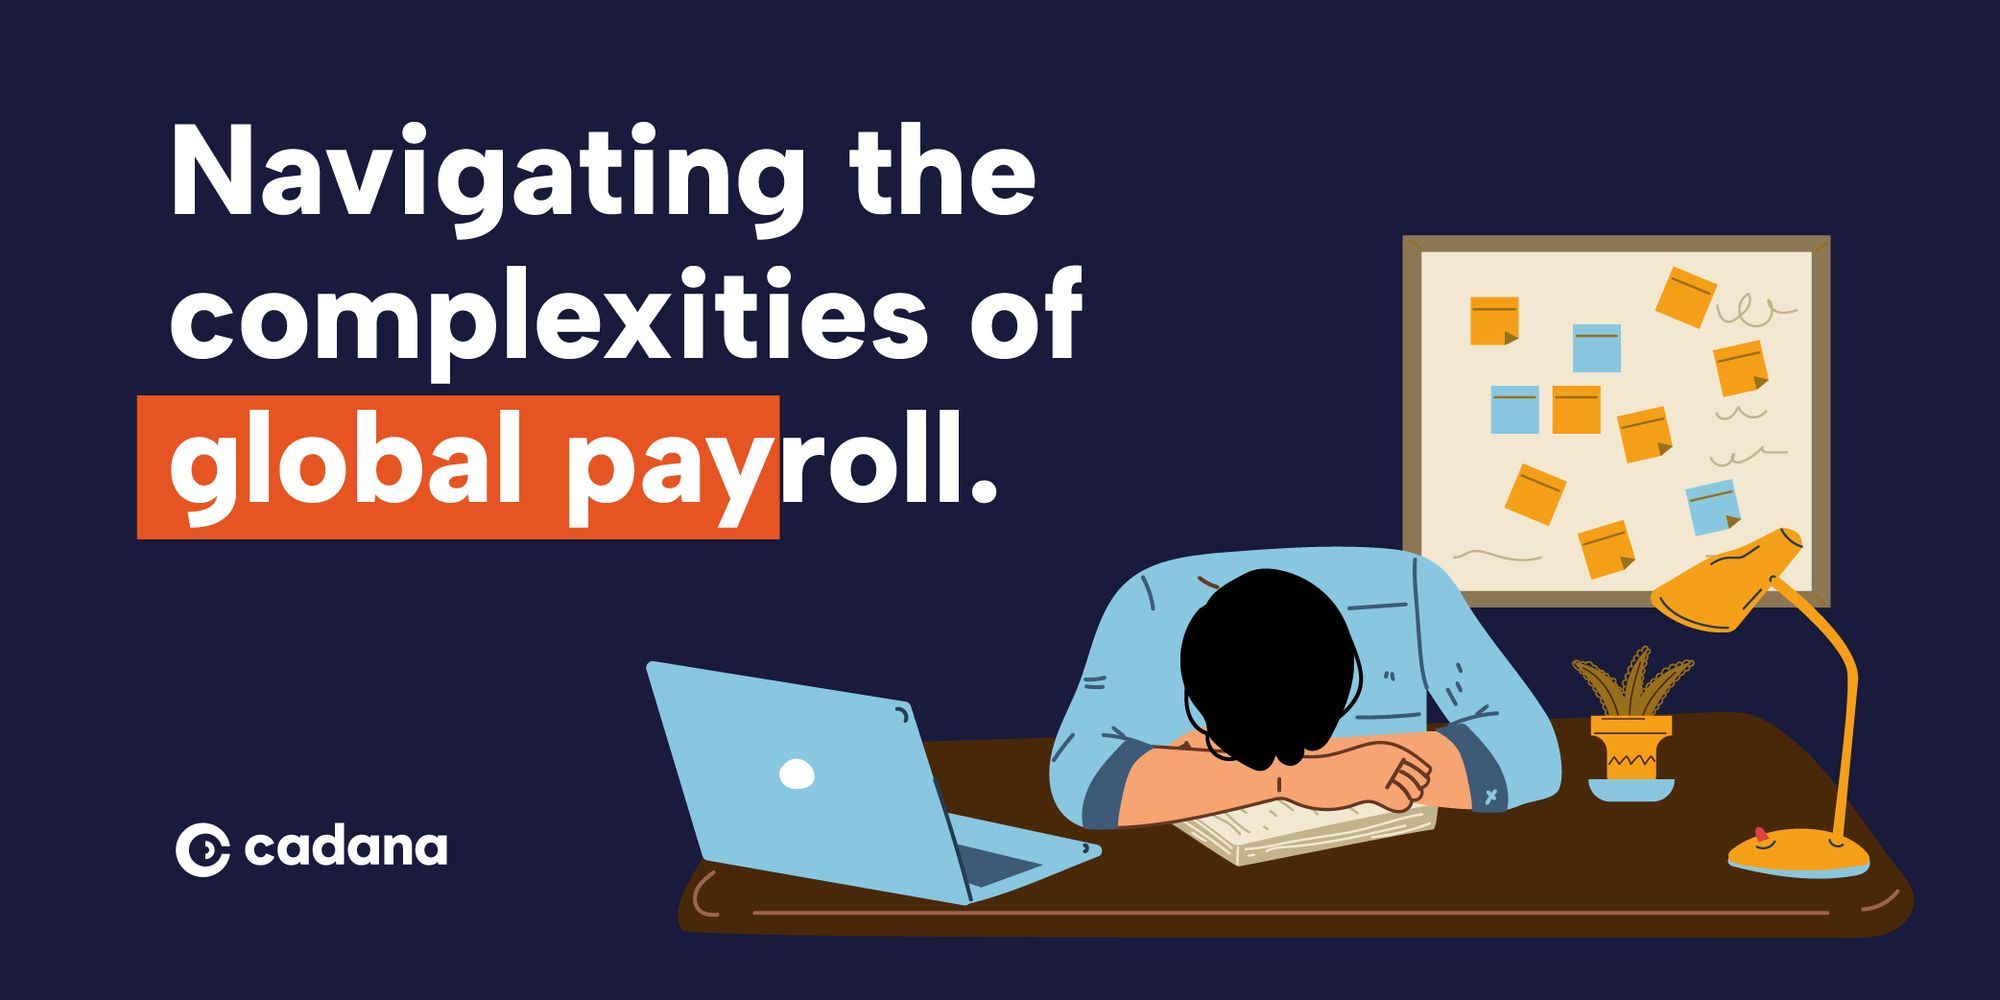 5 Common Challenges of Cross-Border Payroll Services and How to Overcome Them.